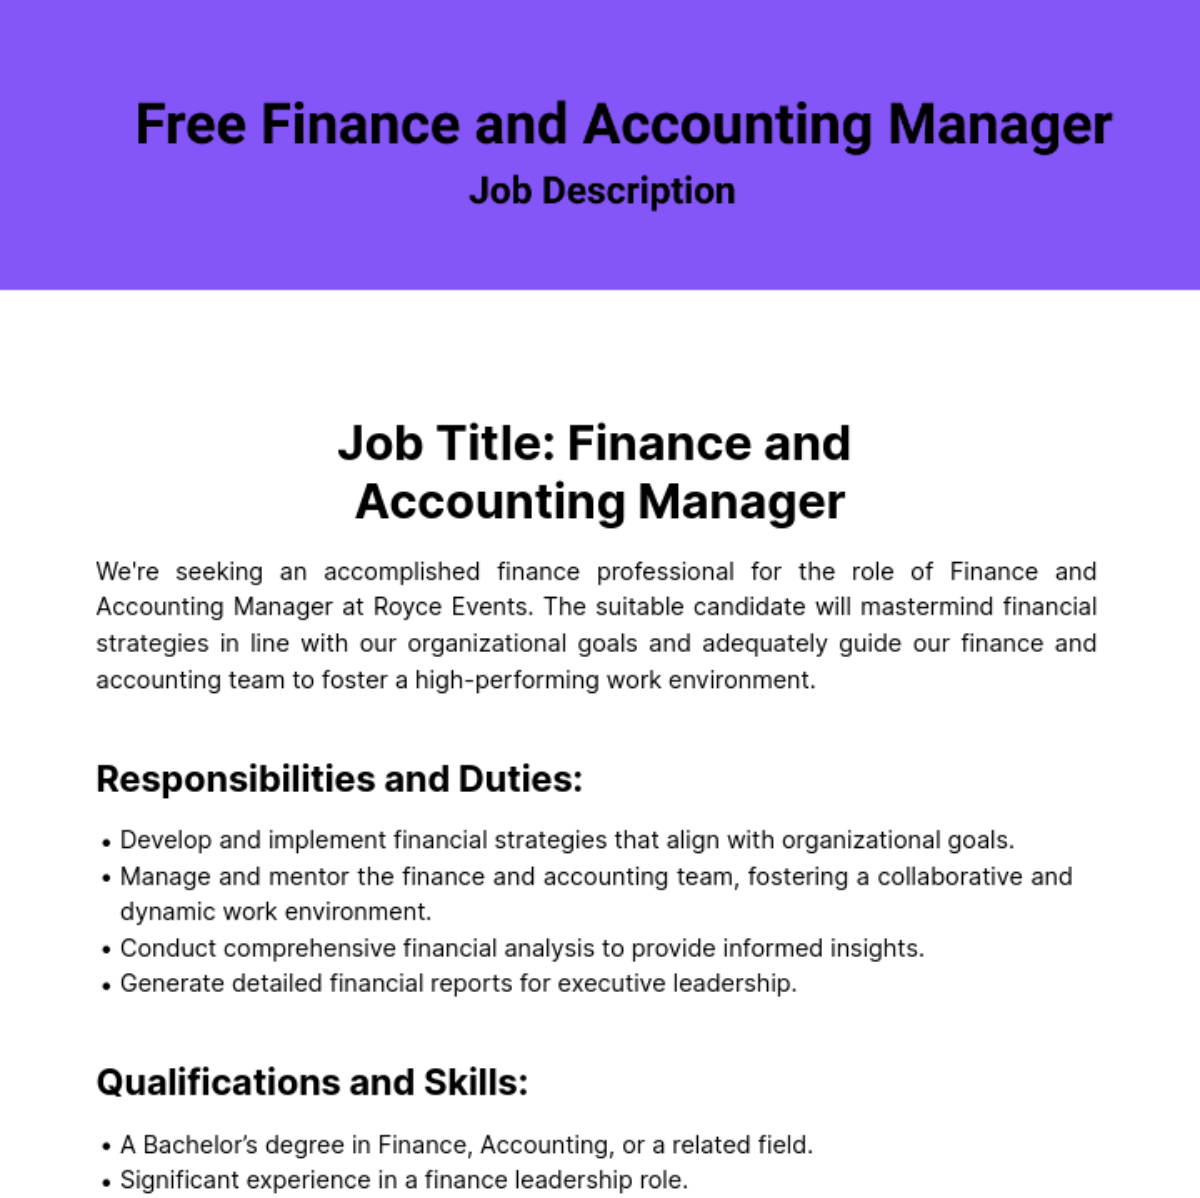 Finance and Accounting Manager Job Description Template